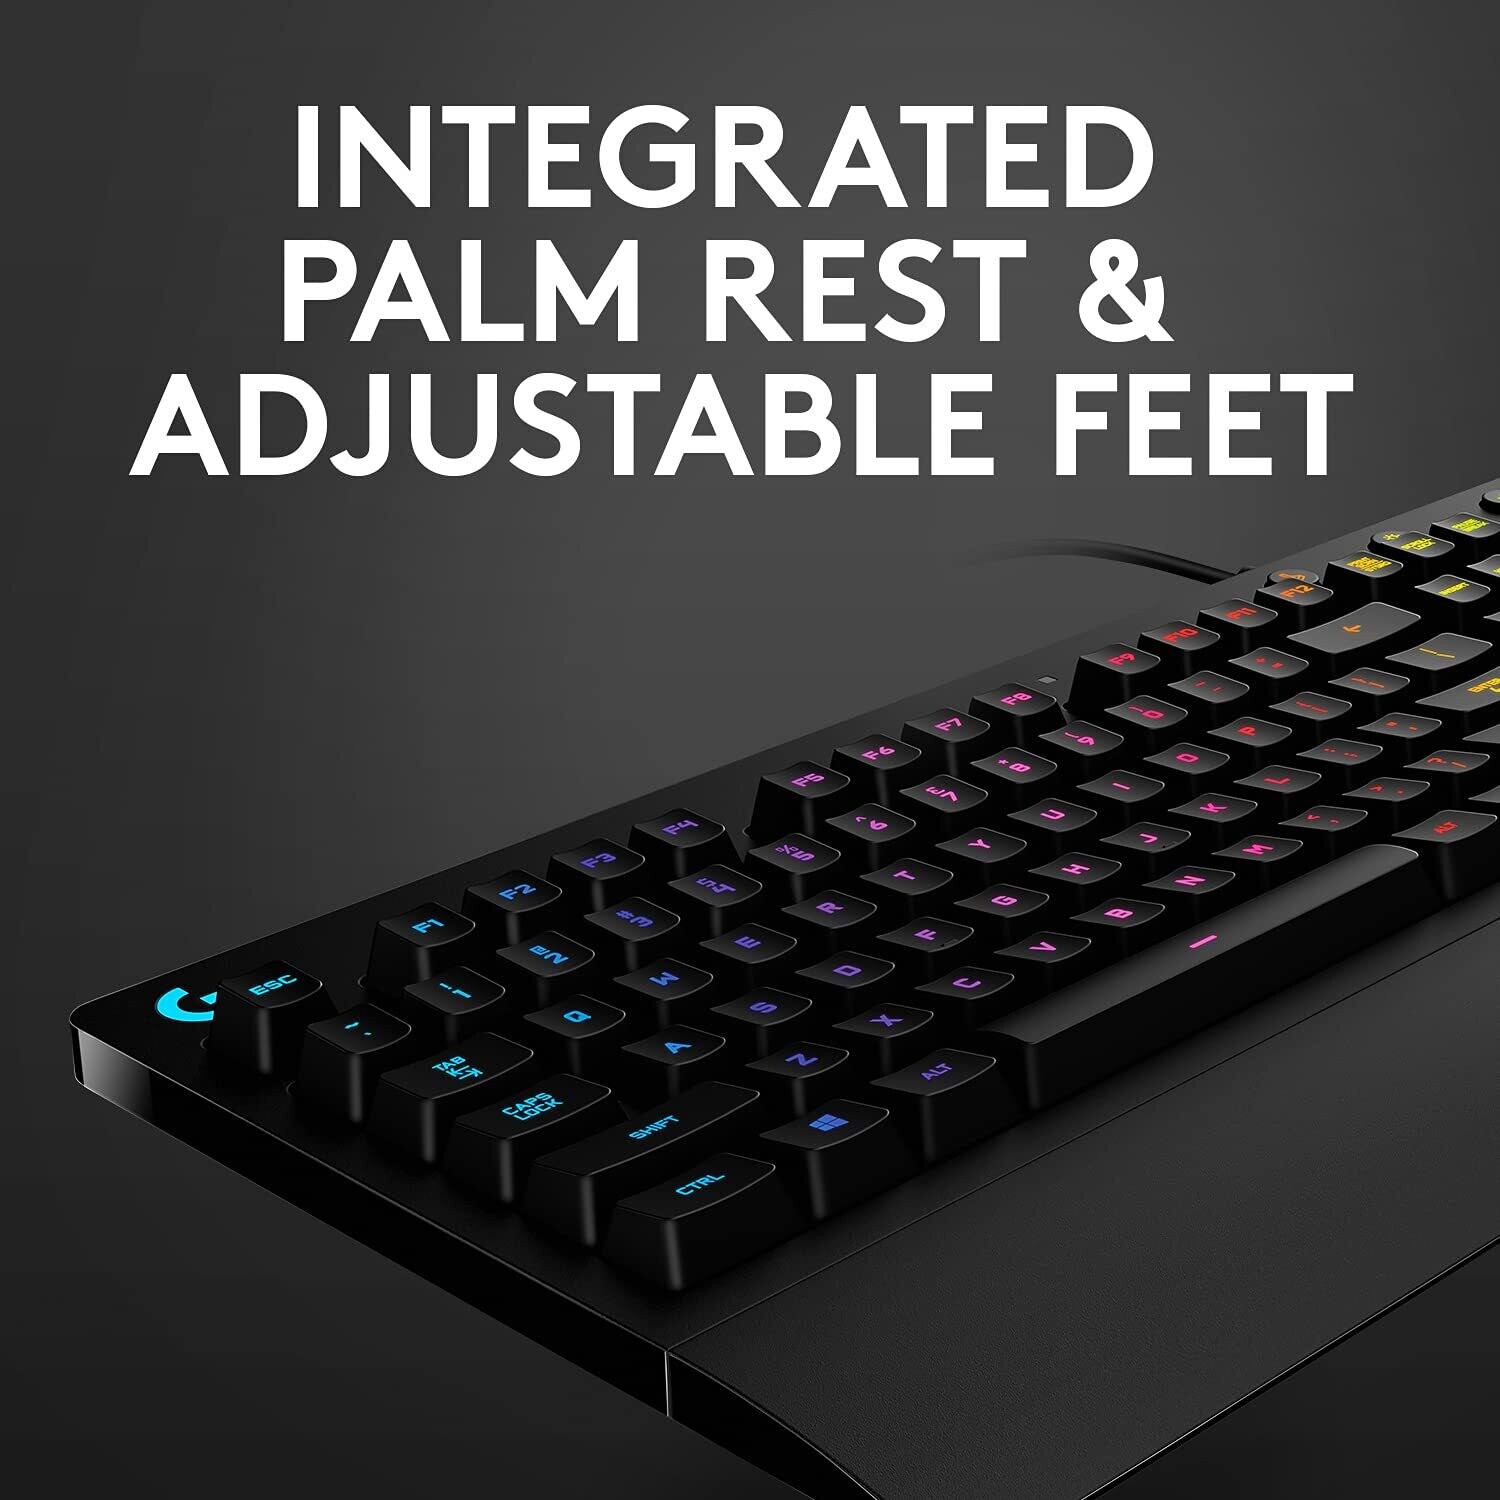 Logitech G213 Gaming Keyboard with Dedicated Media Controls - Rs.3300